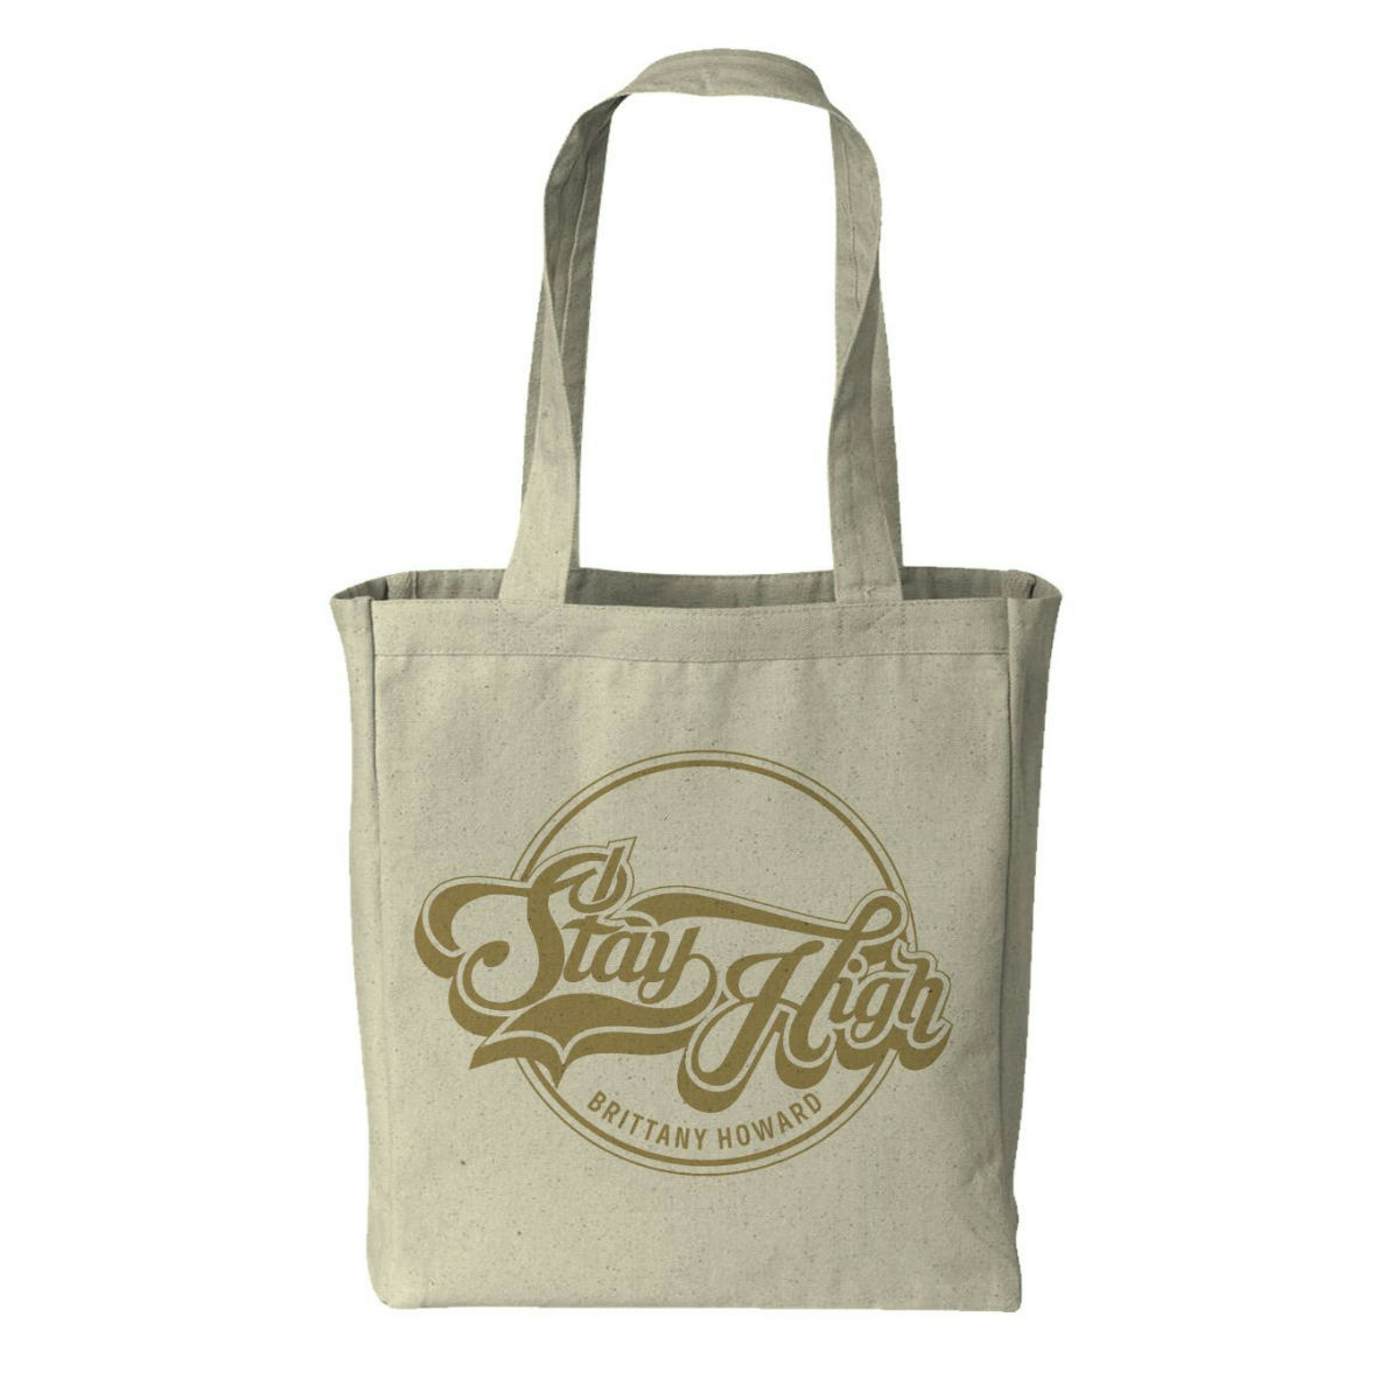 Brittany Howard Stay High Tote Bag